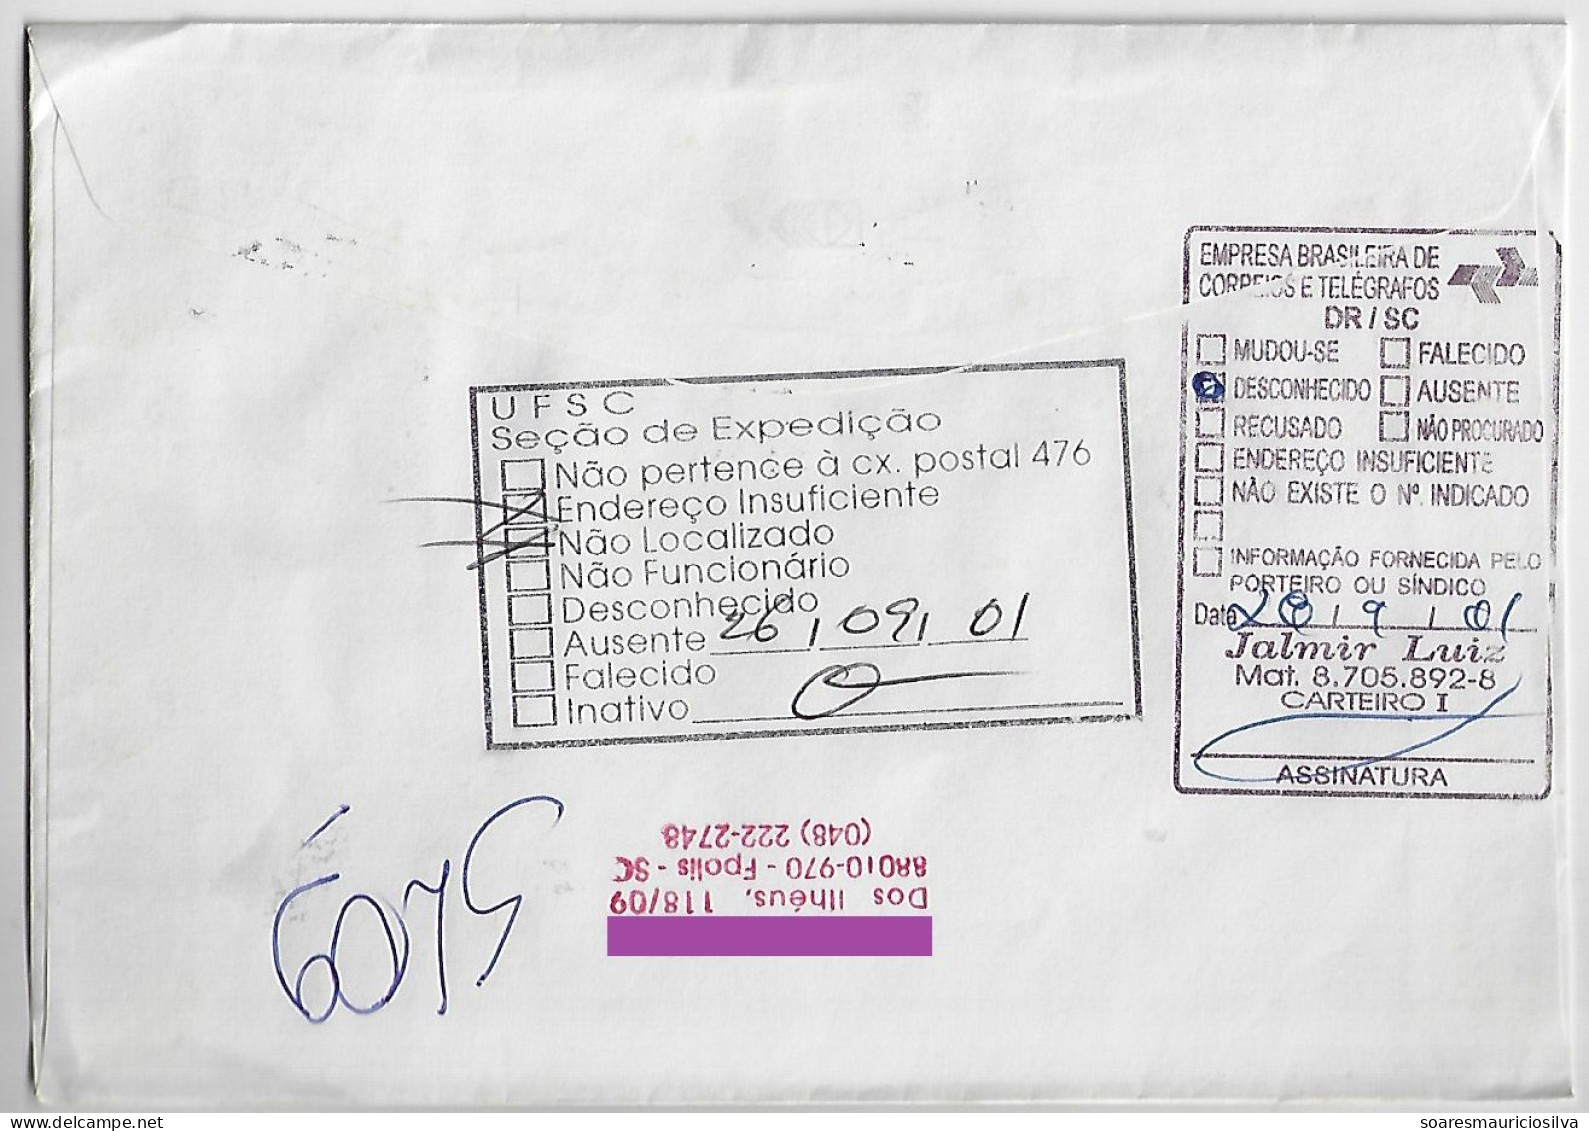 Brazil 2001 Returned To Sender Cover Florianópolis Ilhéus Agency Stamp Extreme Sport Skate Cancel DH = After The Hour - Lettres & Documents